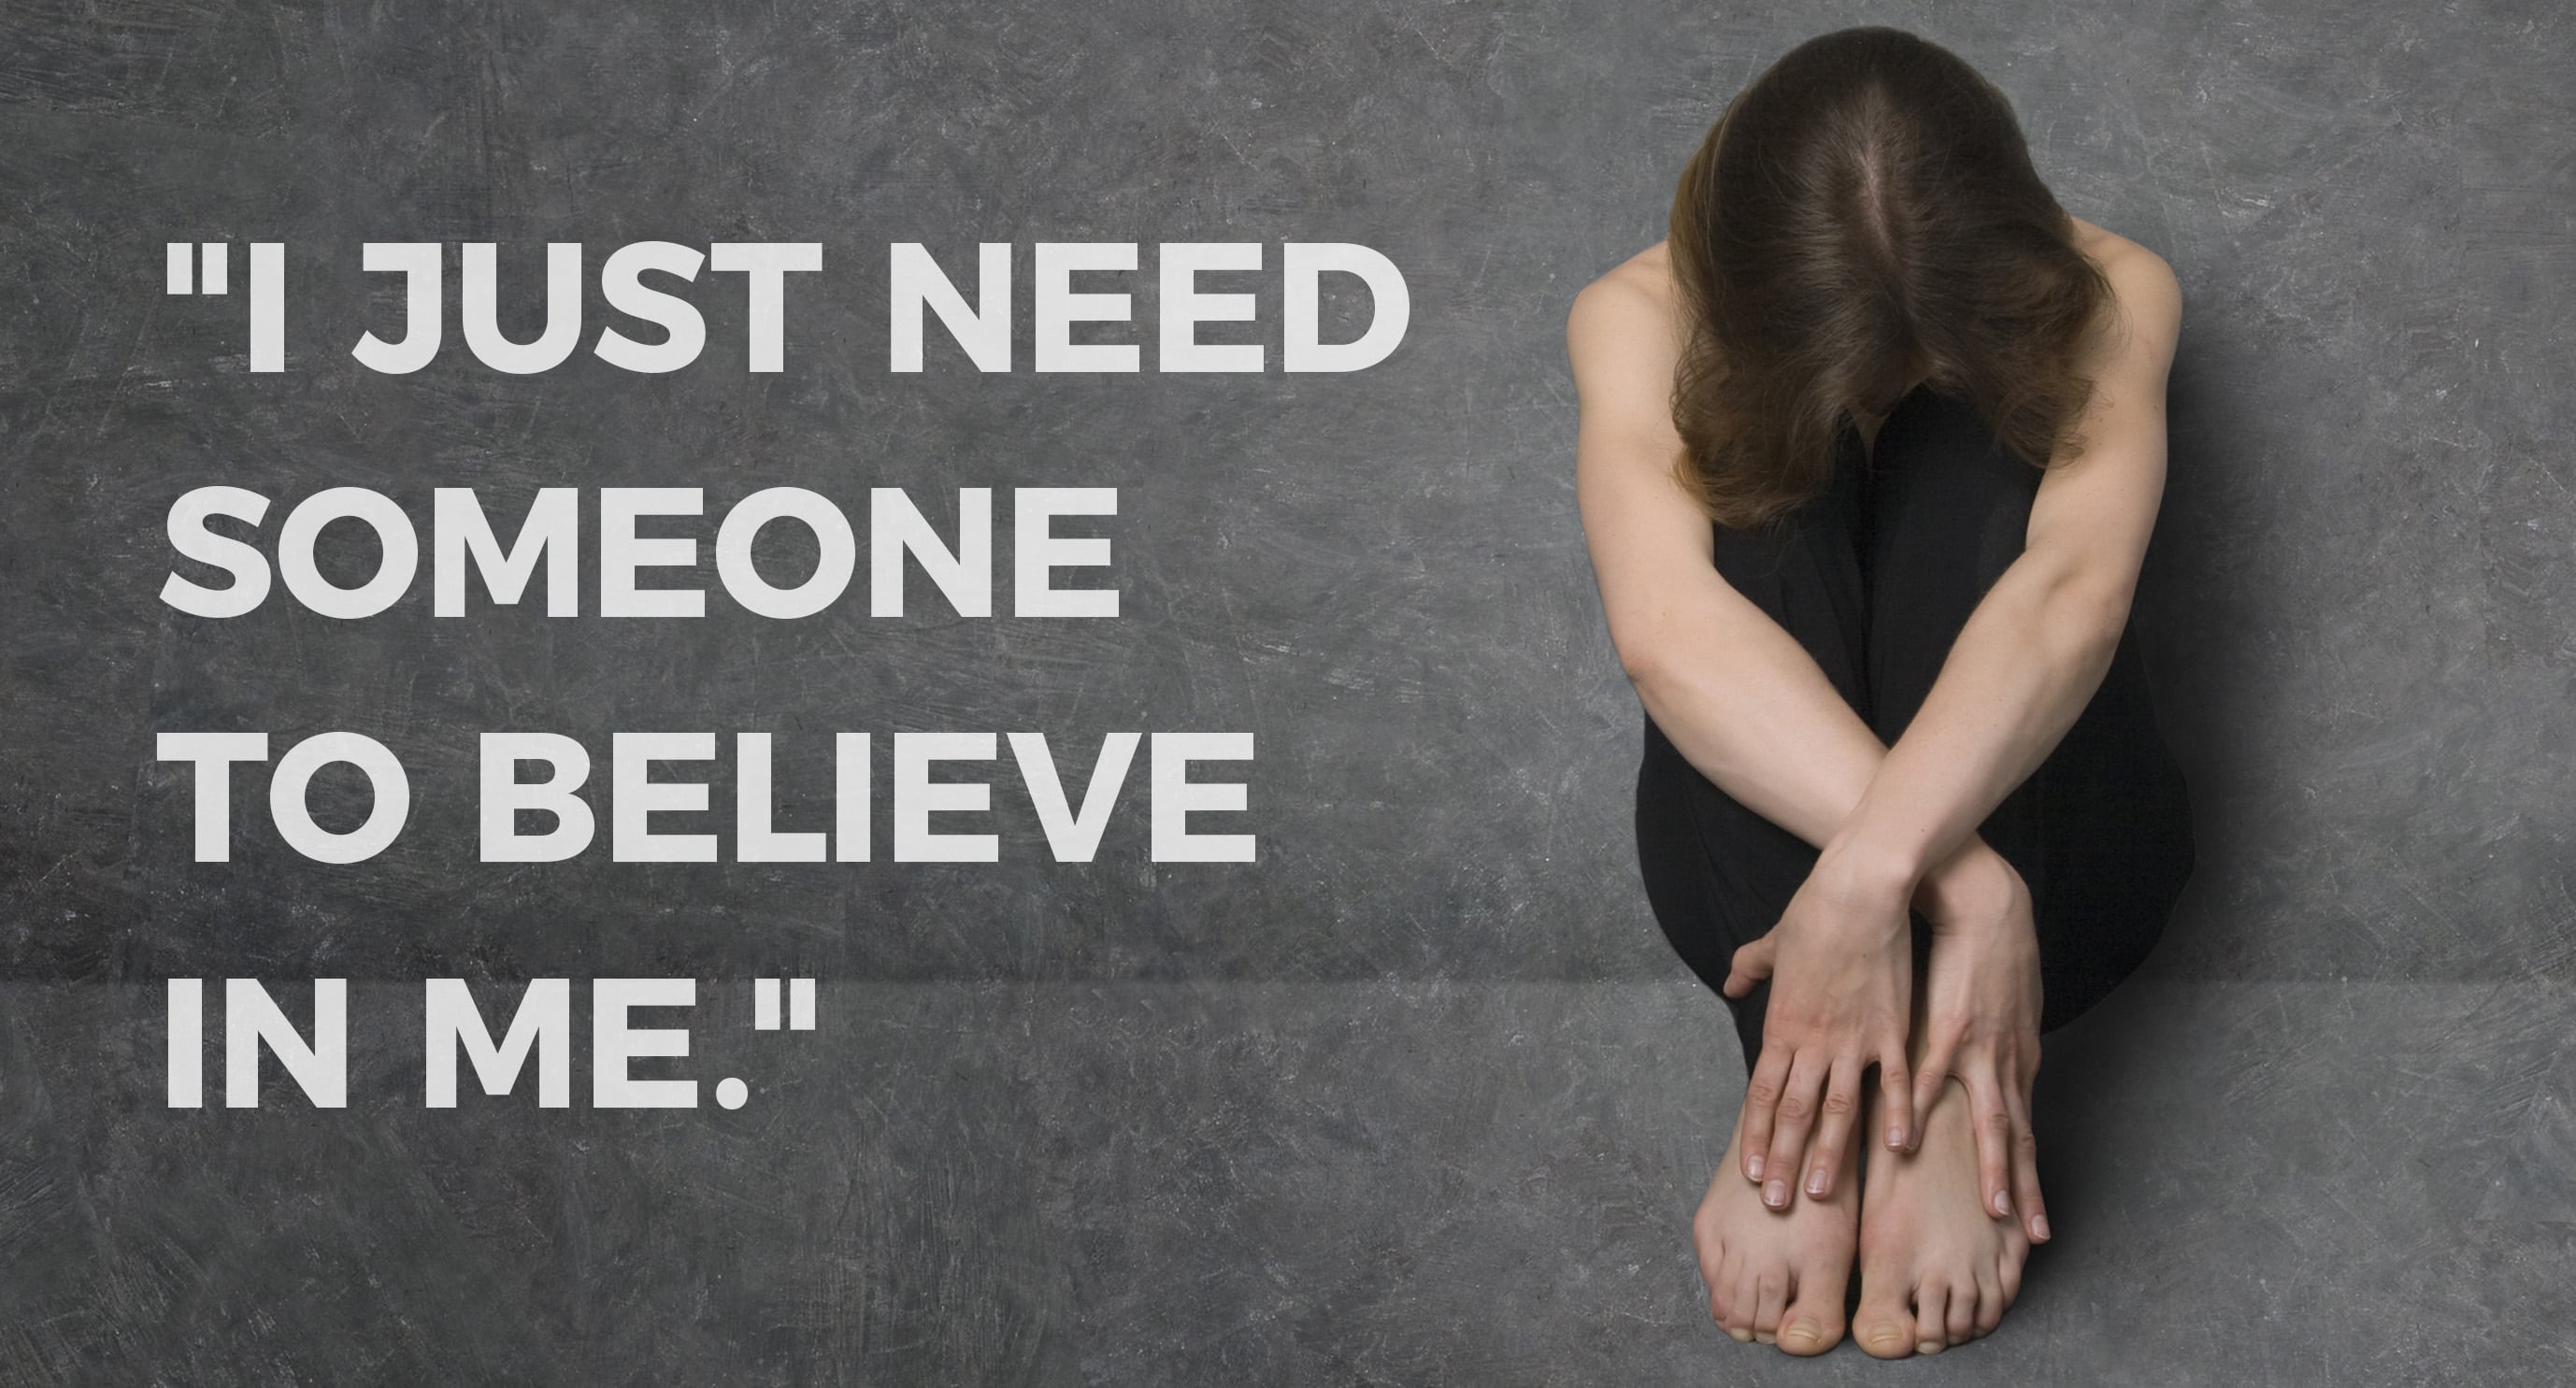 Quote: "I just need someone to believe in me." A female sits with her head down.